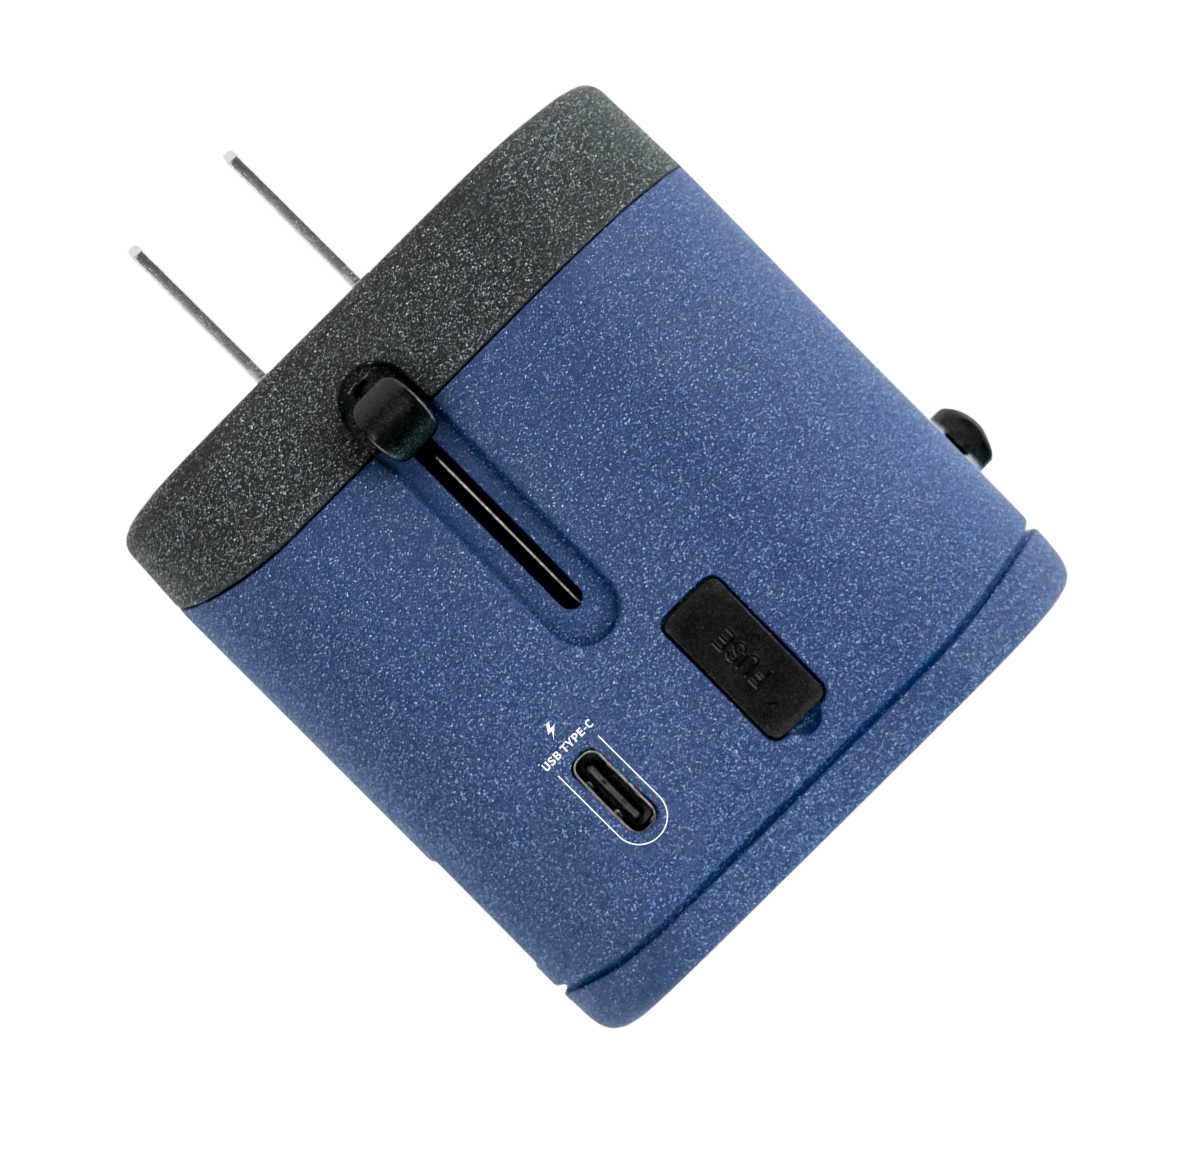 A textured blue and black universal travel adapter. Features 3 build in USB chargers and works in over 150 countries. This world travel adapter kit allows you to charge 5 devices simultaneously. This compact and lightweight universal travel adapter is perfect for your next trip.